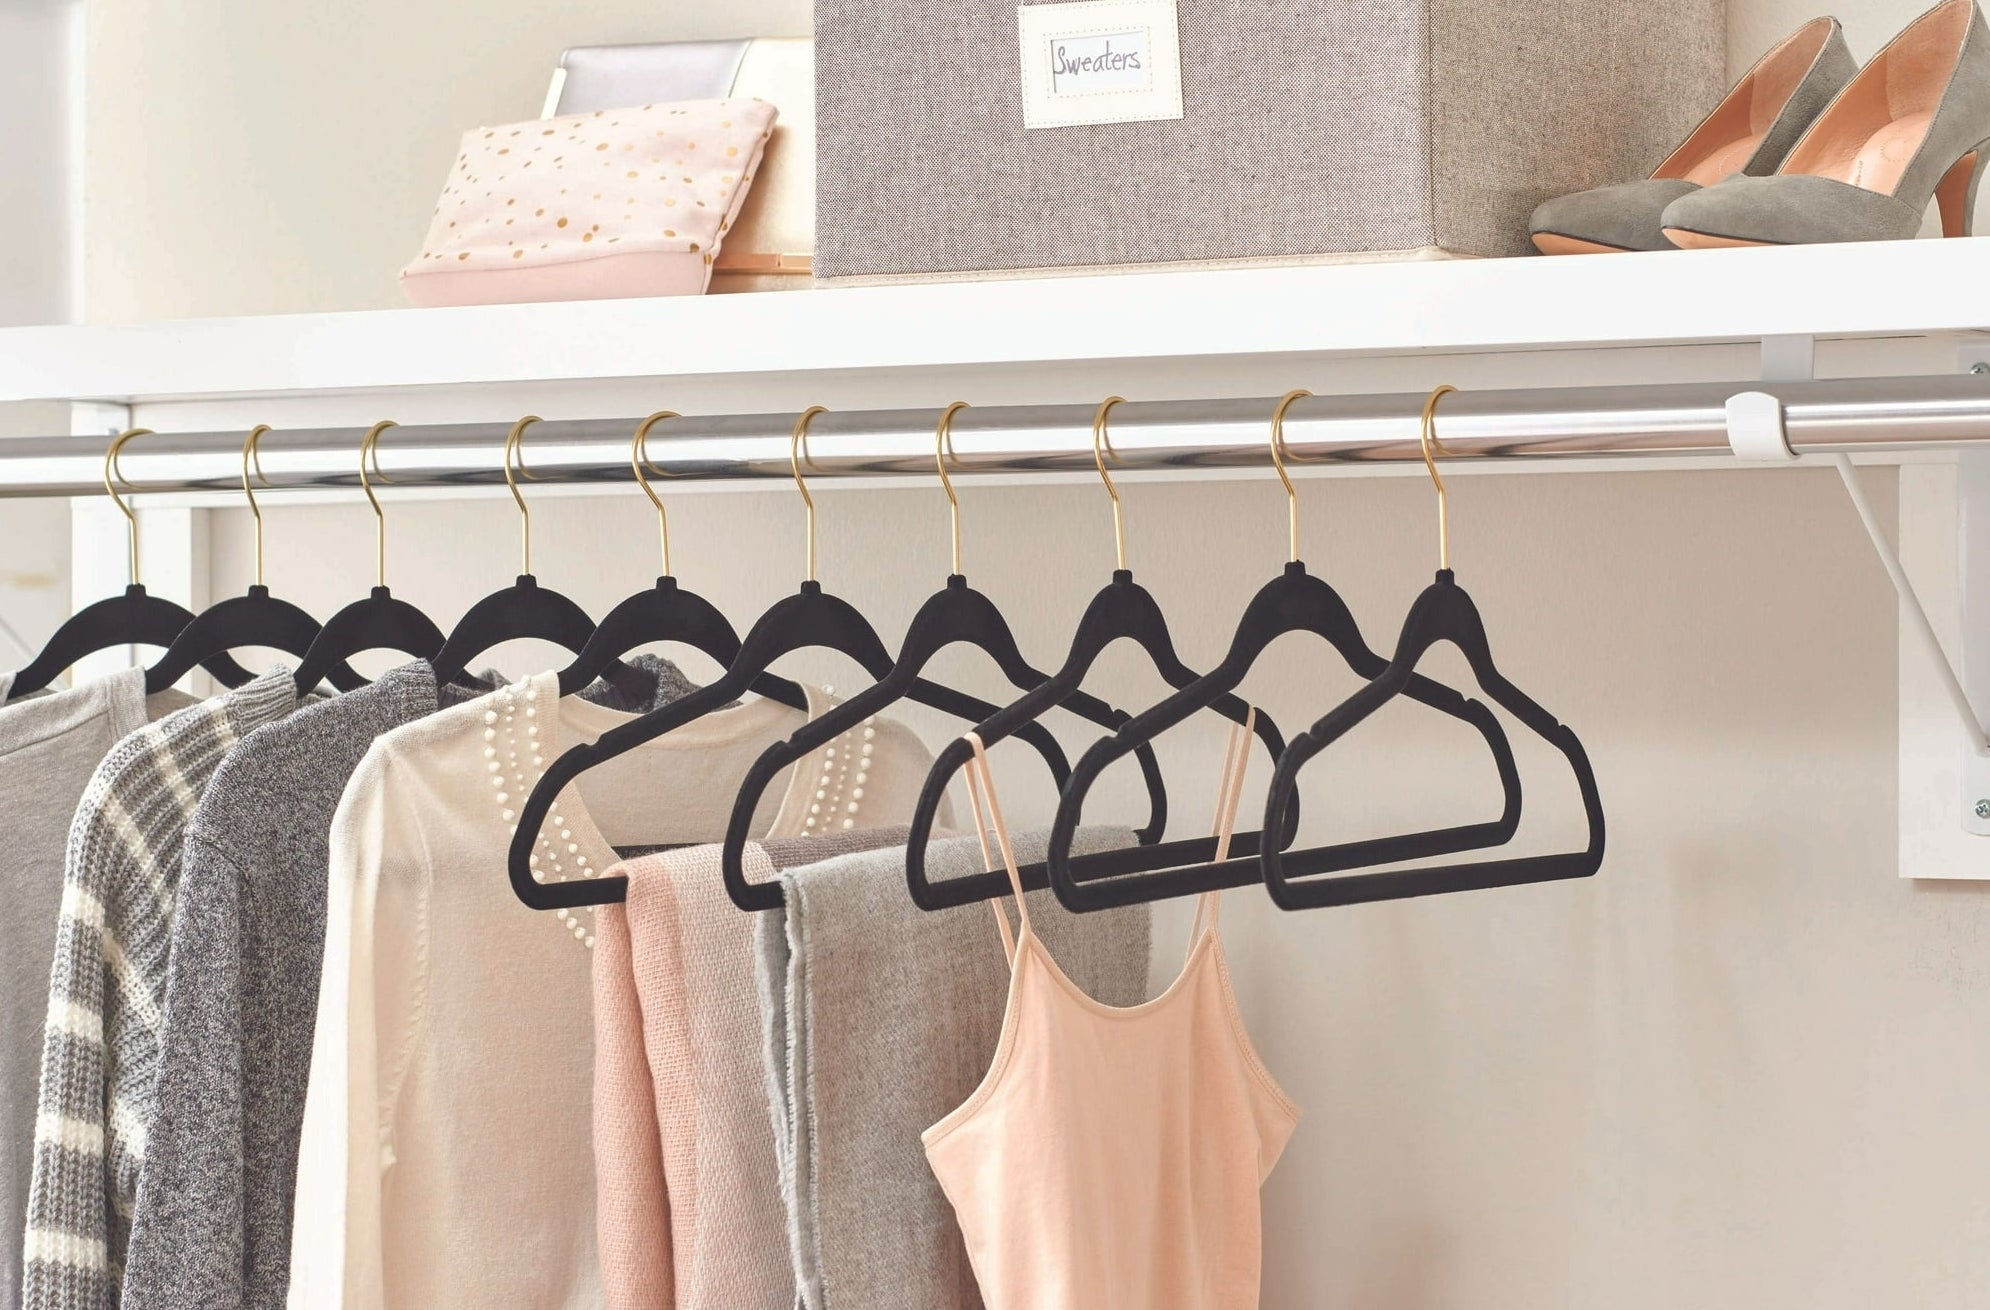 the hangers in a closet holding clothes